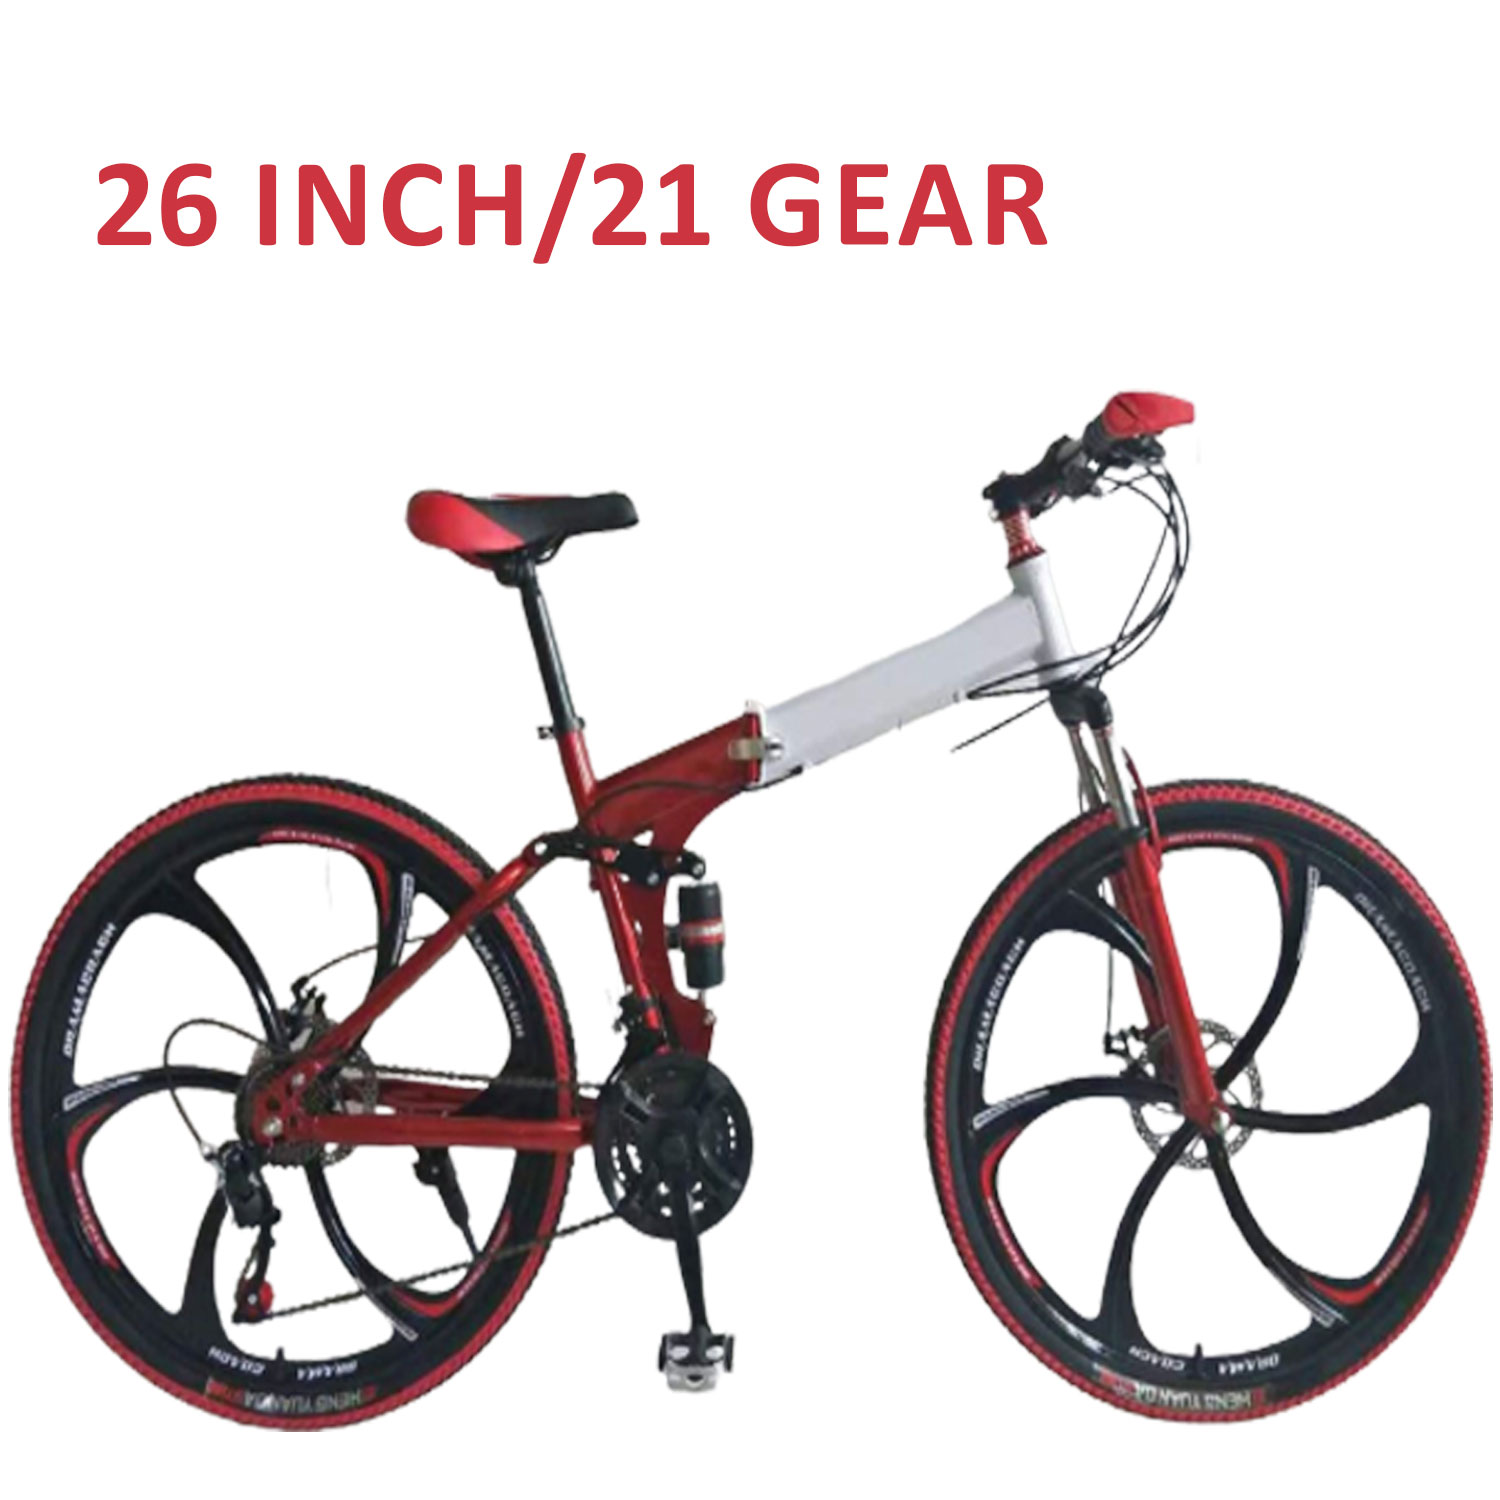 Cycle for Kids | Bike for Boys and Girls |Multicolor MD-068 (26" inch)